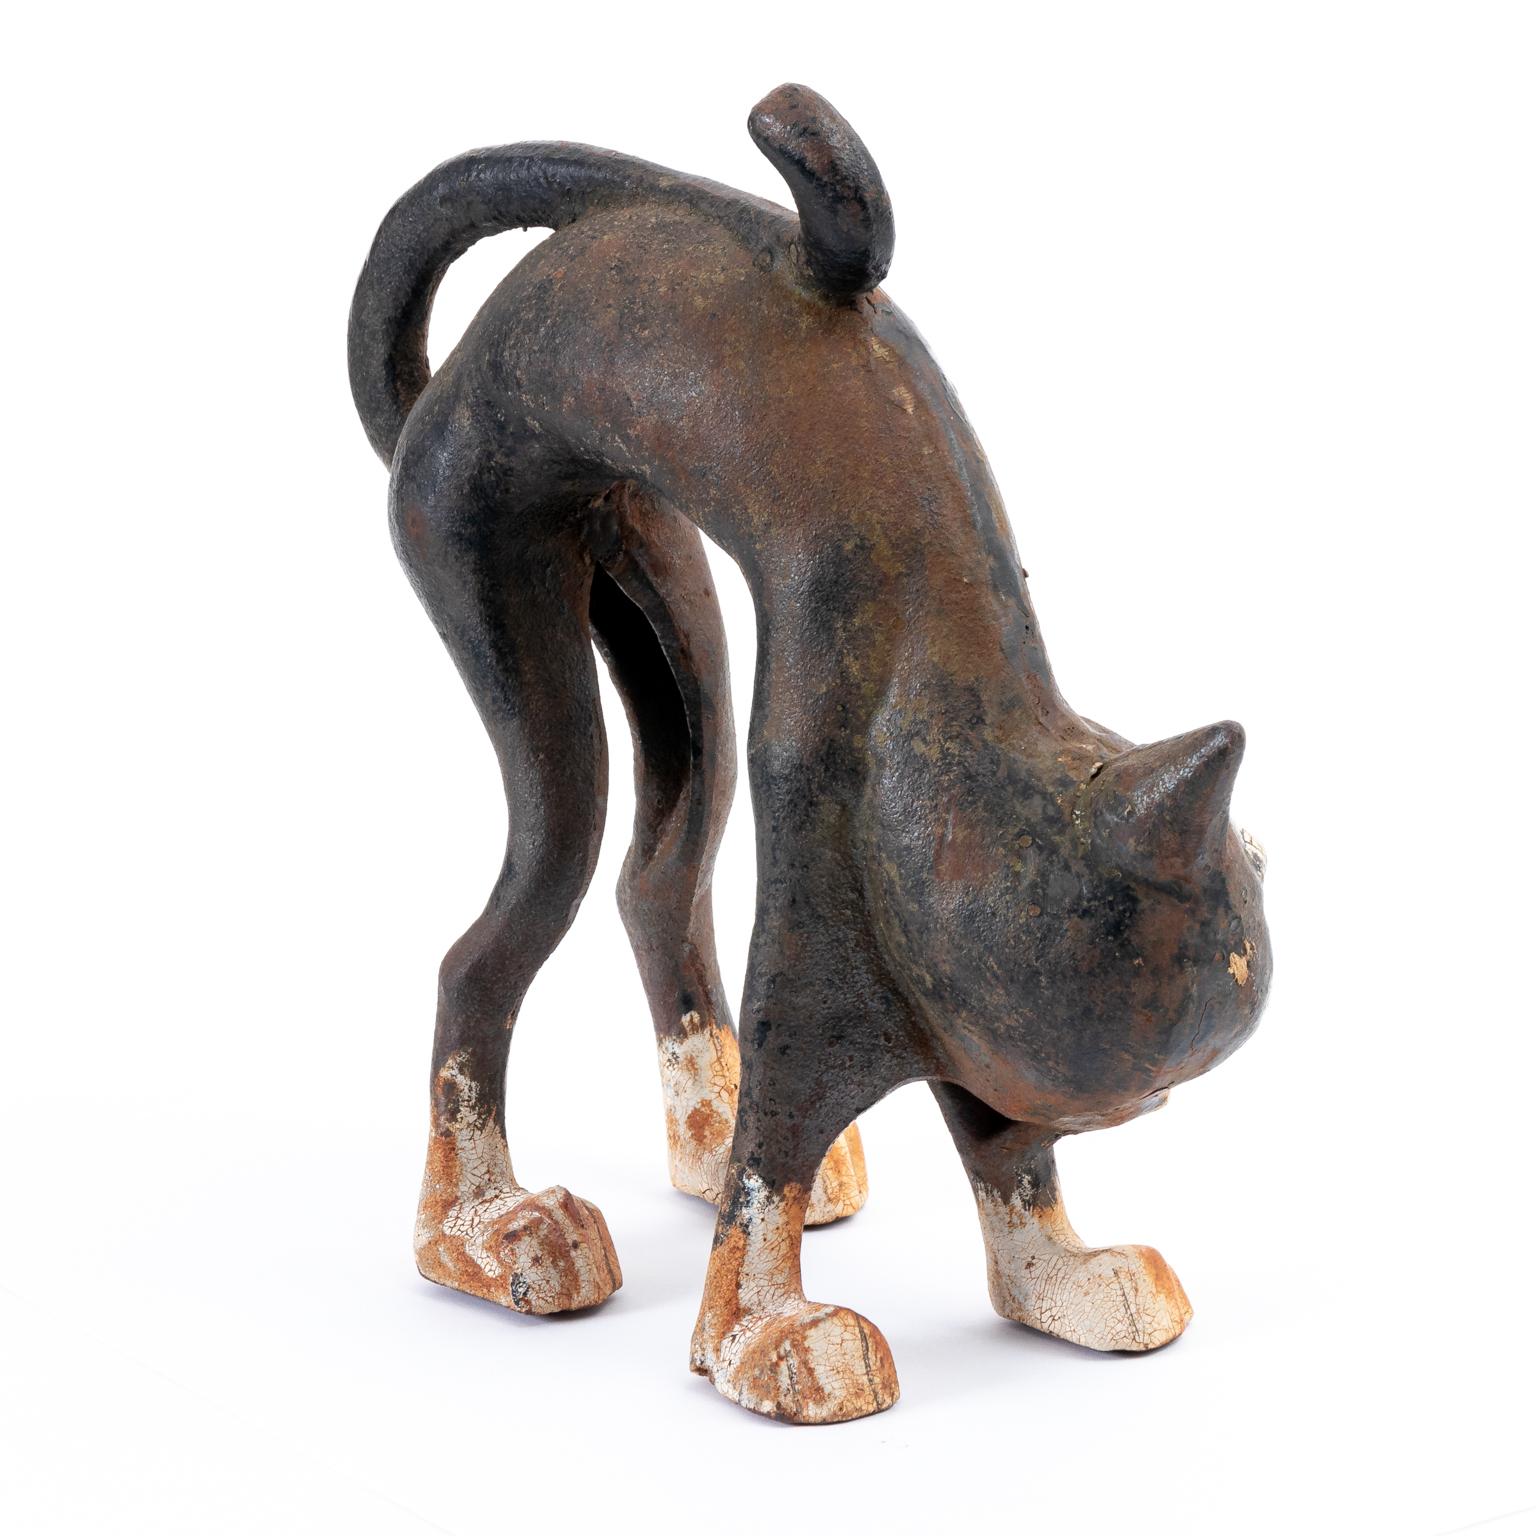 Original cast iron black cat door stops by the Hubley Company with original paint and patina, circa 1920-1930s. The cat is depicted with an arched back and expressive face. Please note of wear consistent with age including minor paint wear, paint